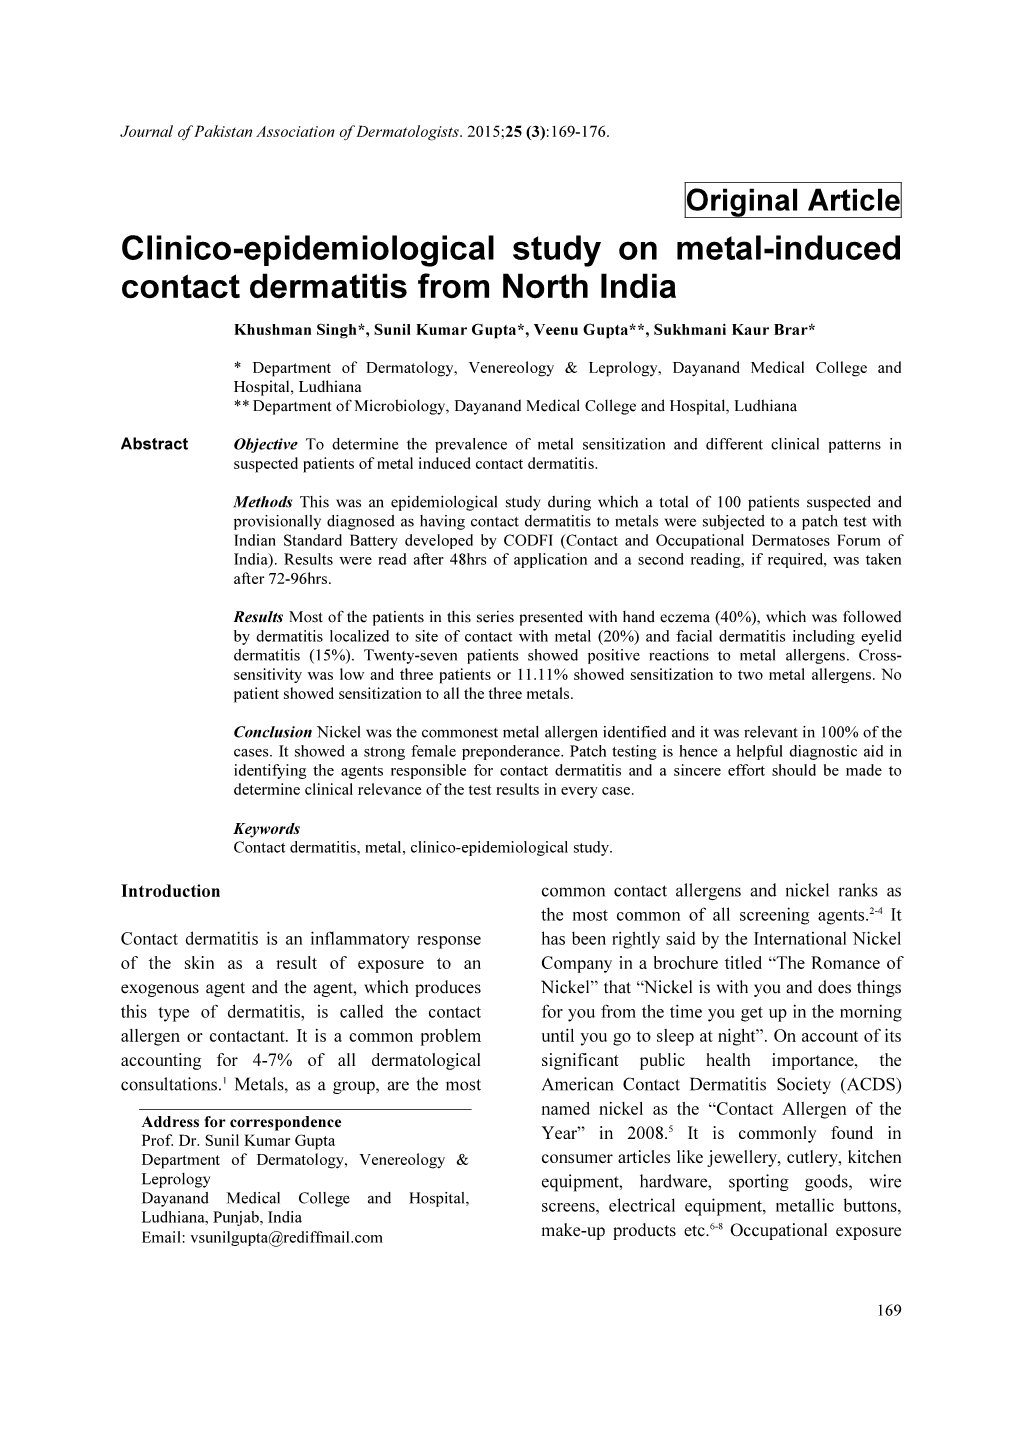 Clinico-Epidemiological Study on Metal-Induced Contact Dermatitis from North India